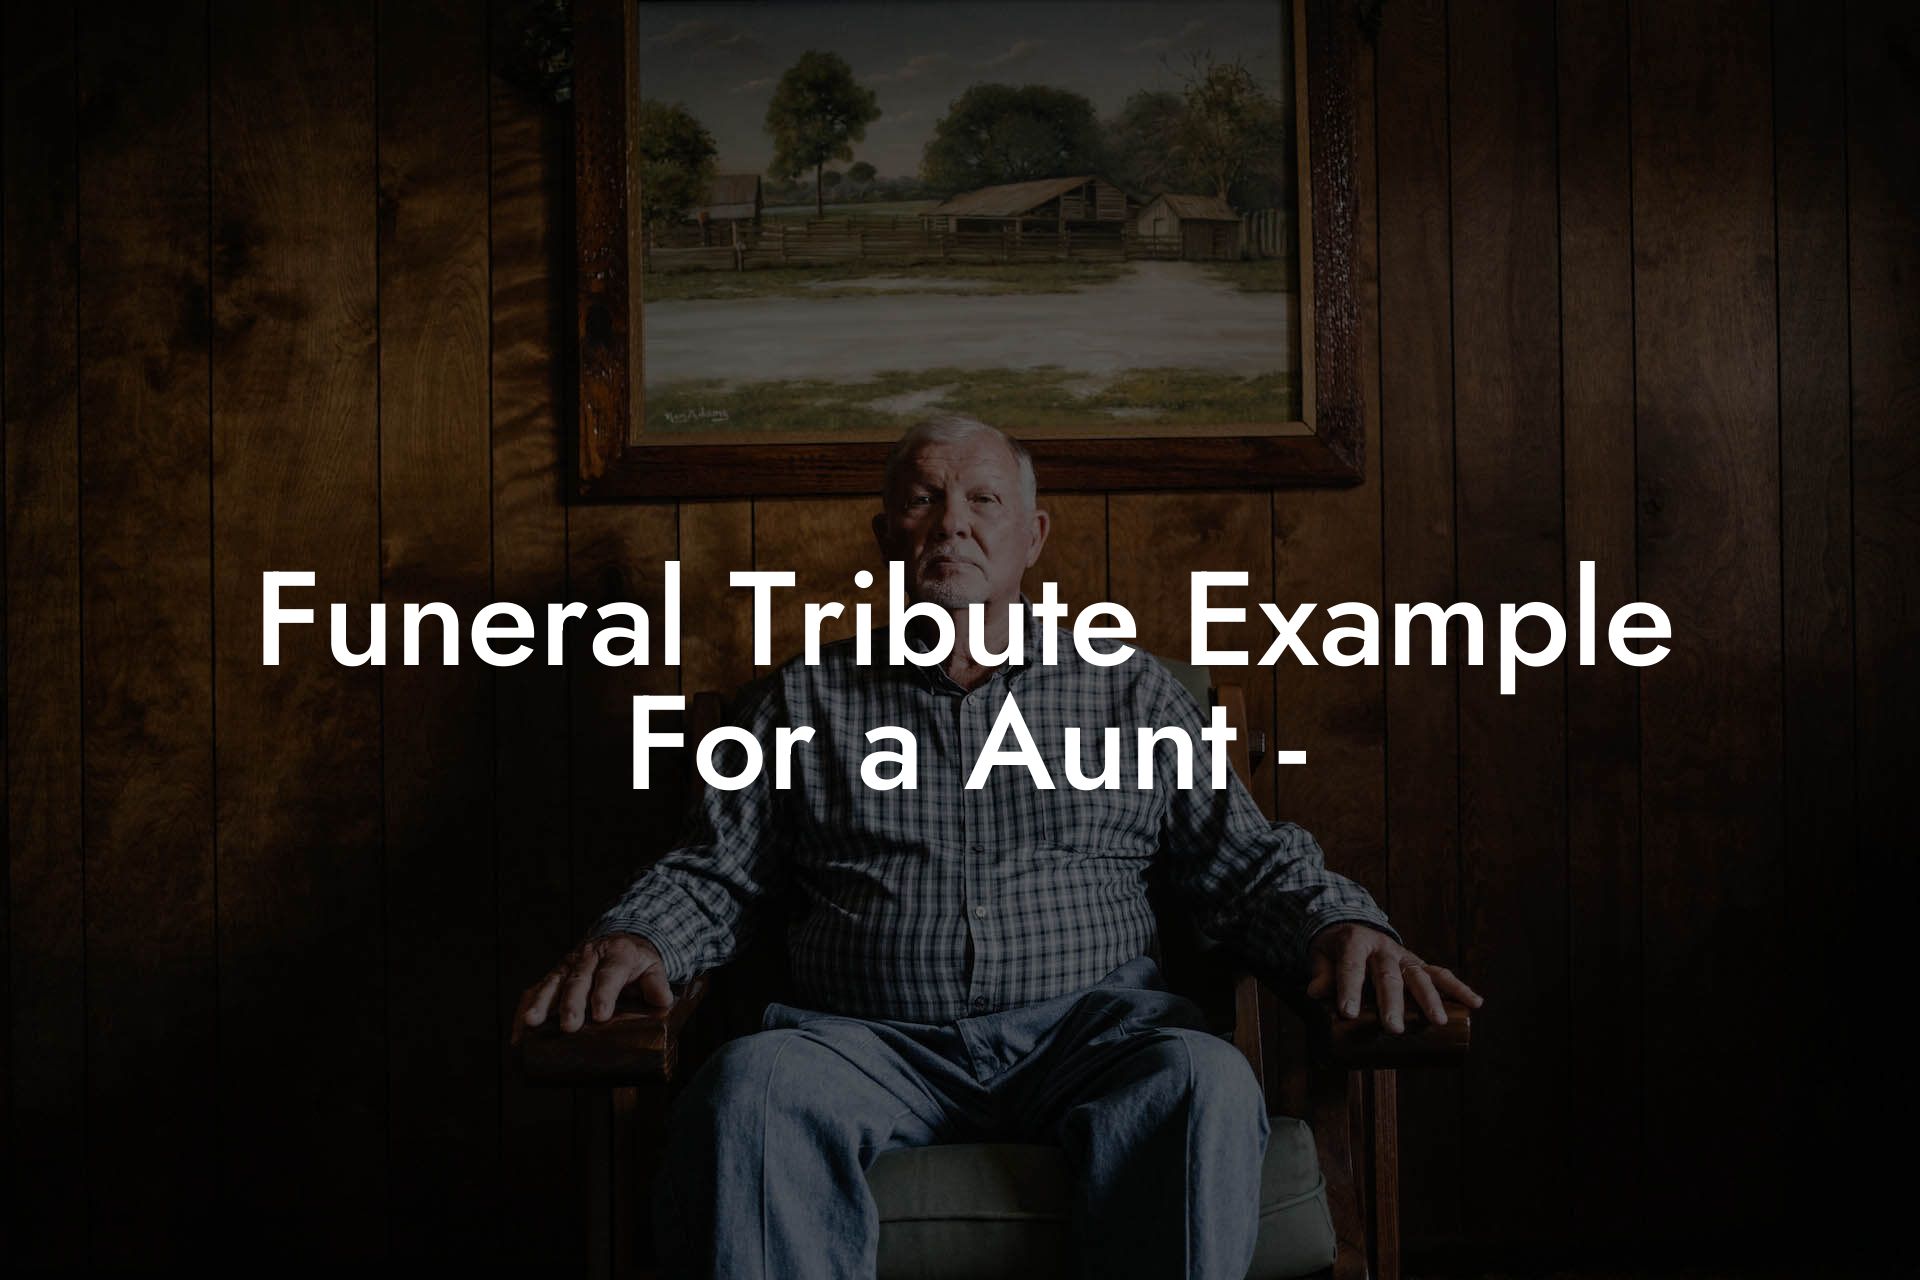 Funeral Tribute Example For a Aunt -